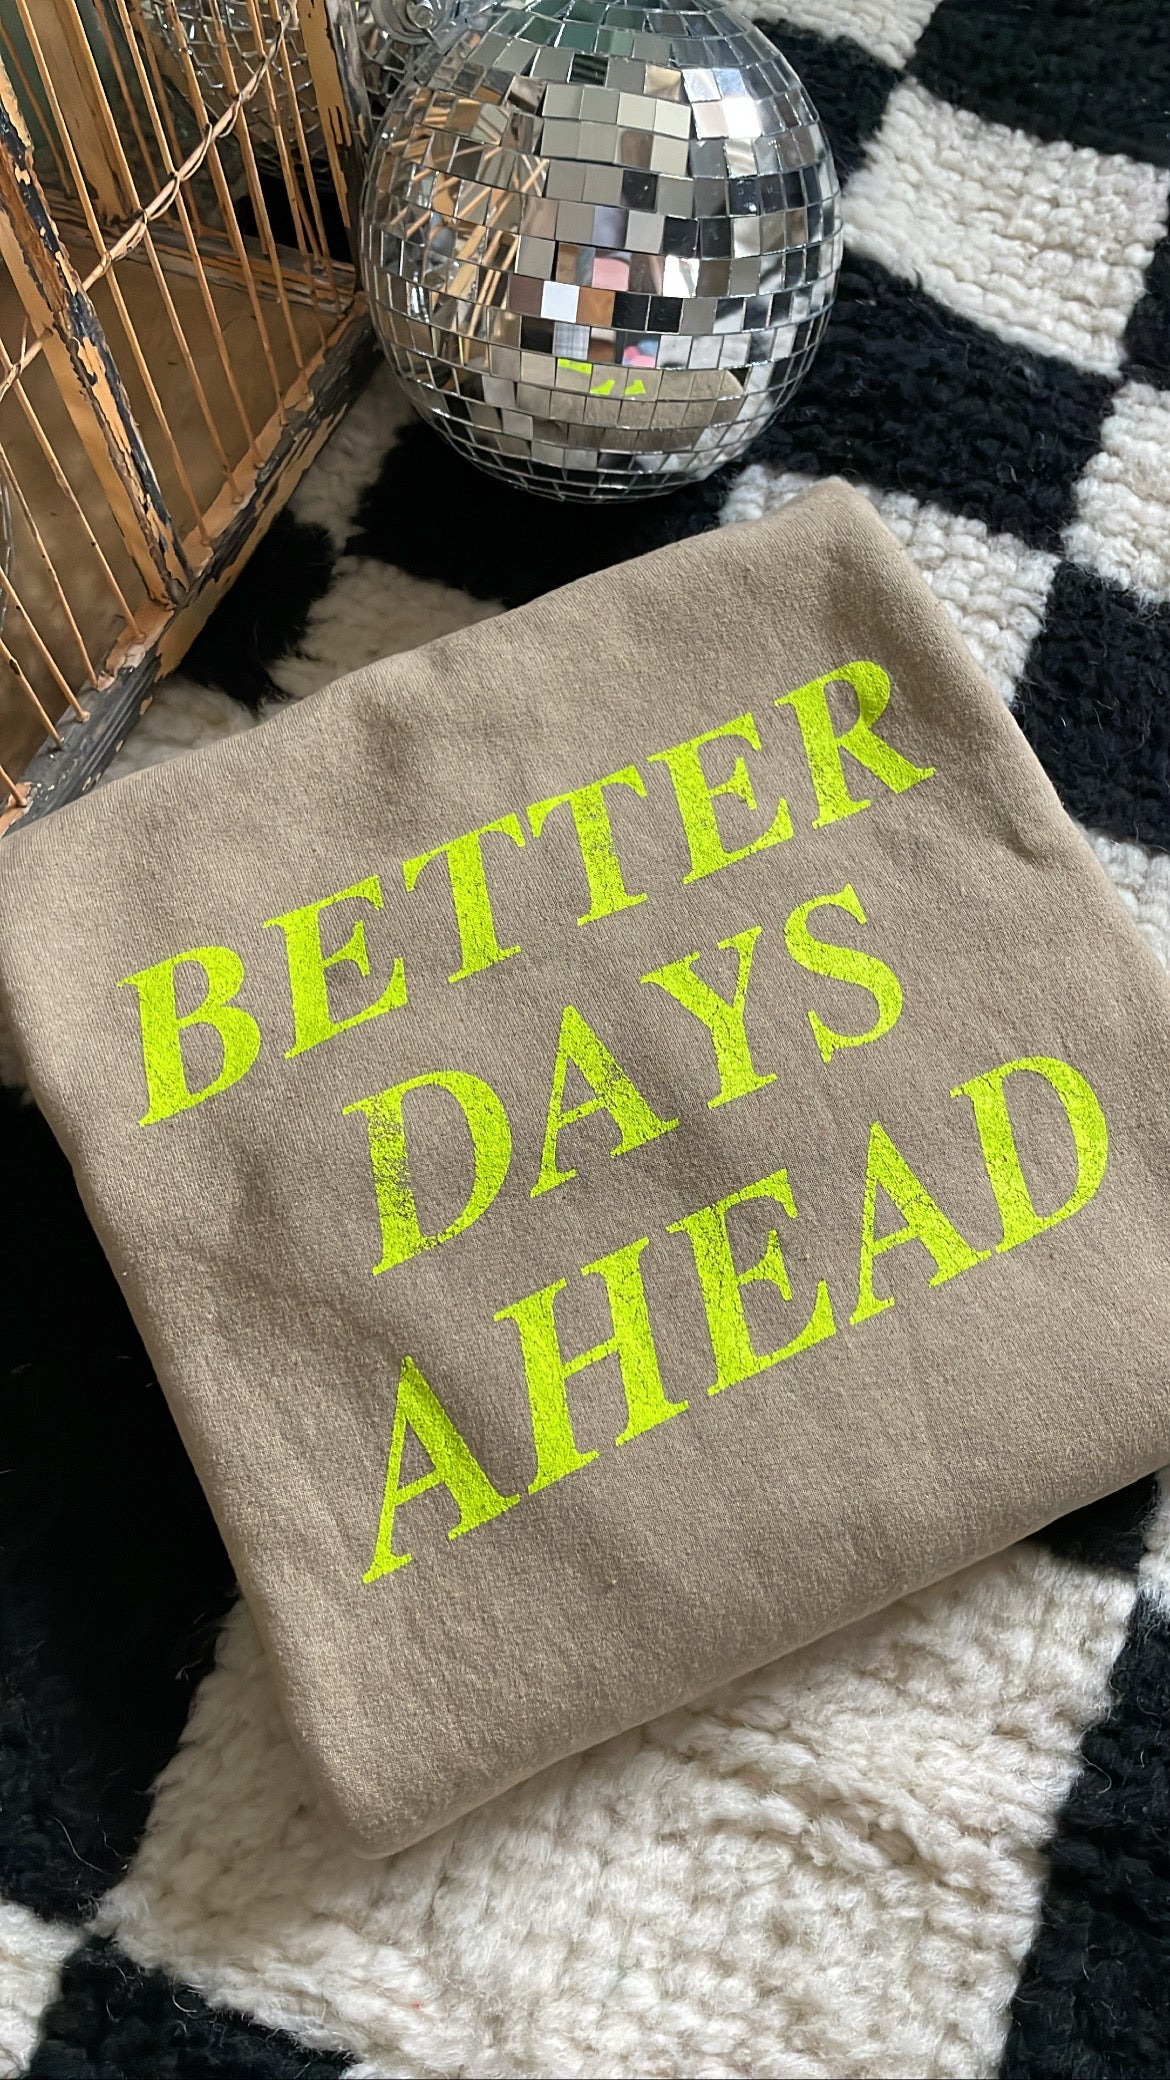 There Are Better Days Ahead Shirt, Aesthetic Sweatshirt for Women